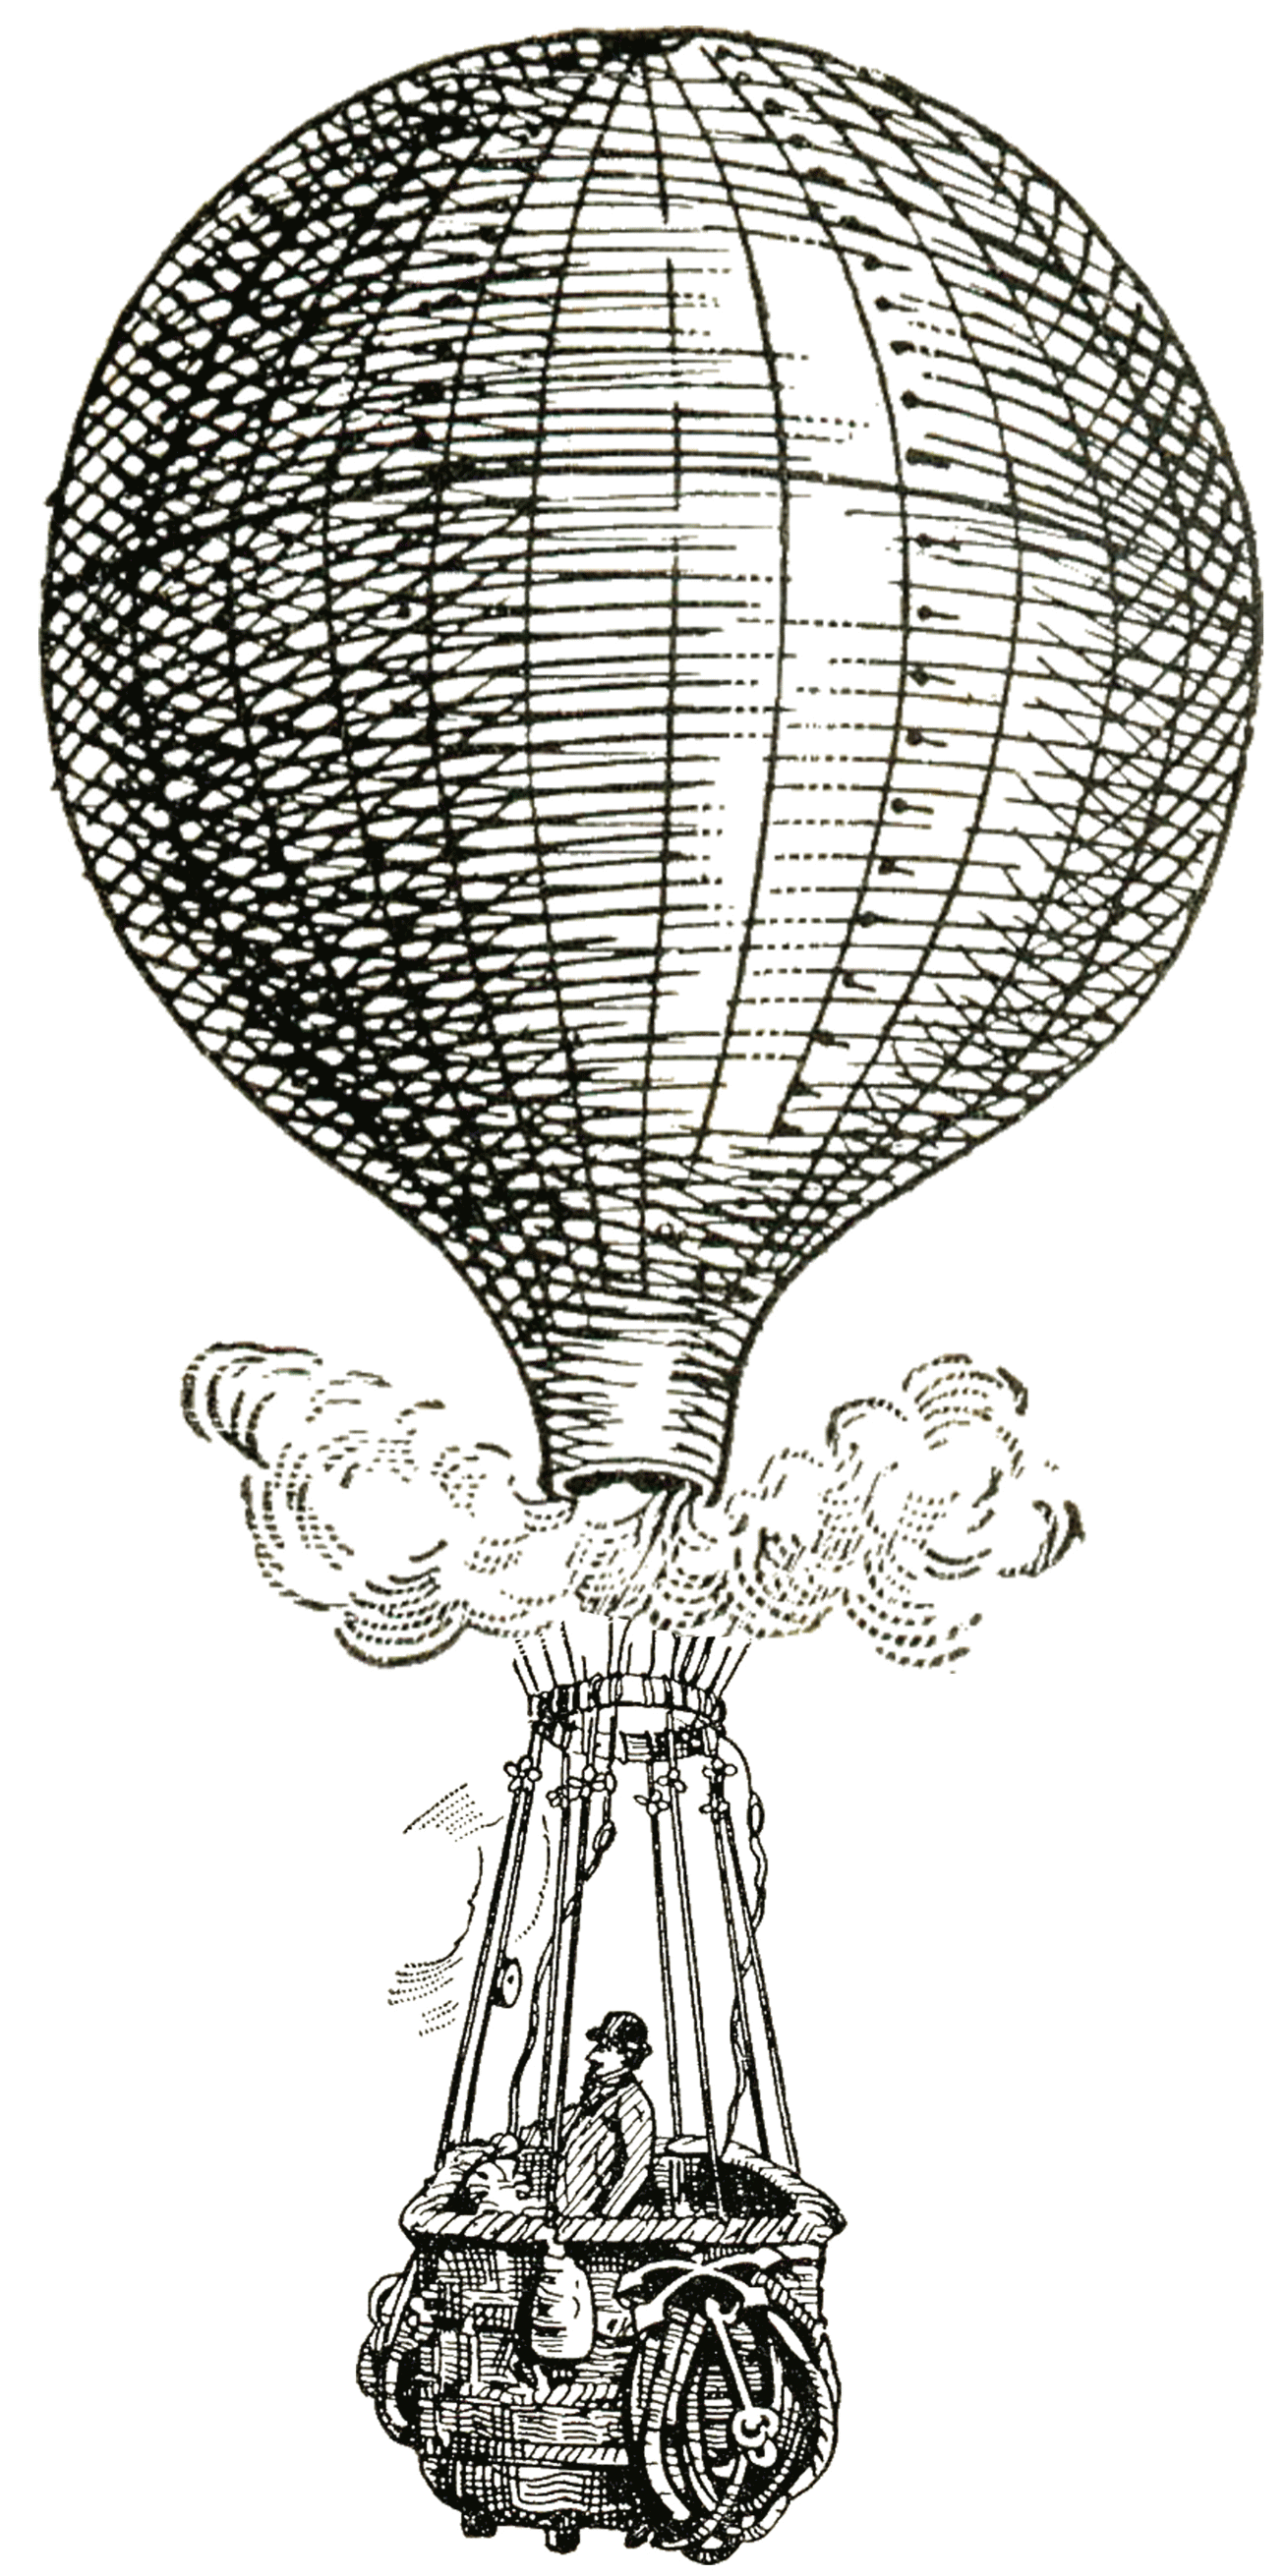 Vintage Images - Hot Air Balloons - Steampunk - The Graphics Fairy